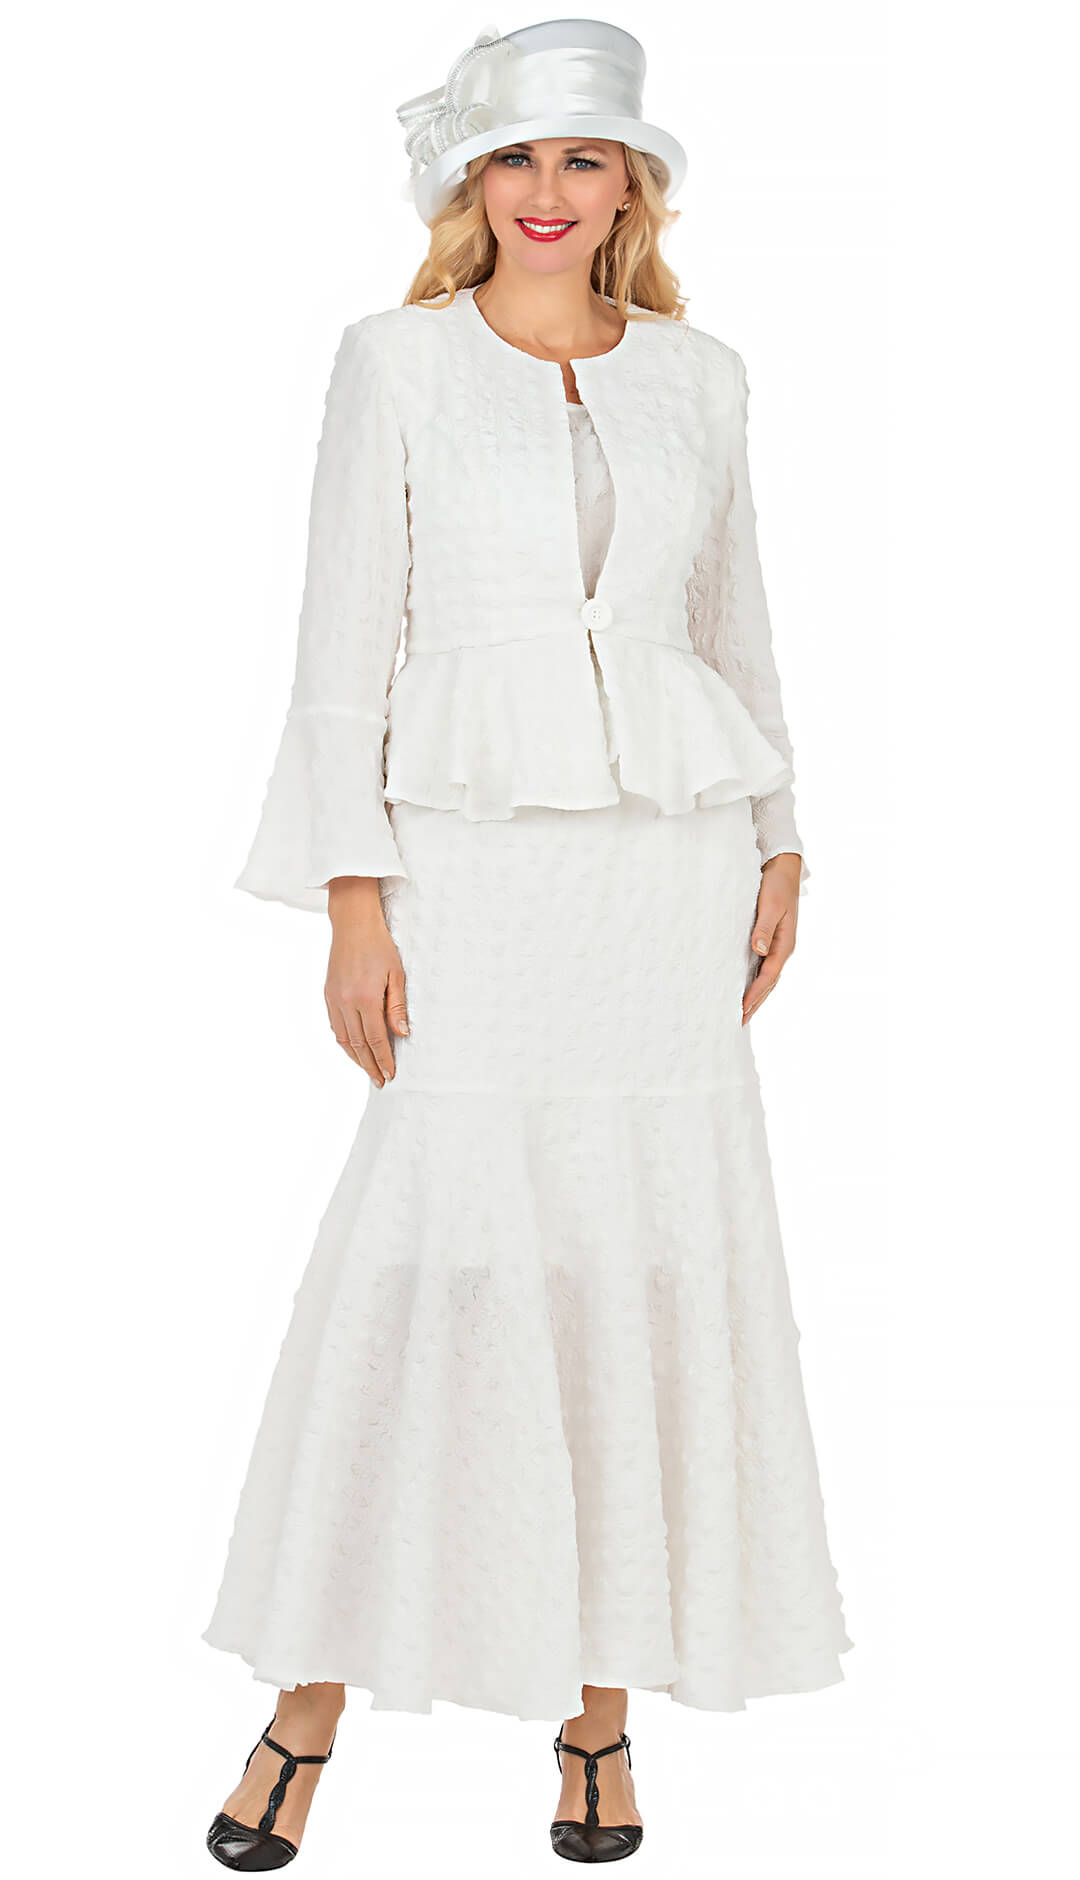 Giovanna Suit 0943B-White - Church Suits For Less